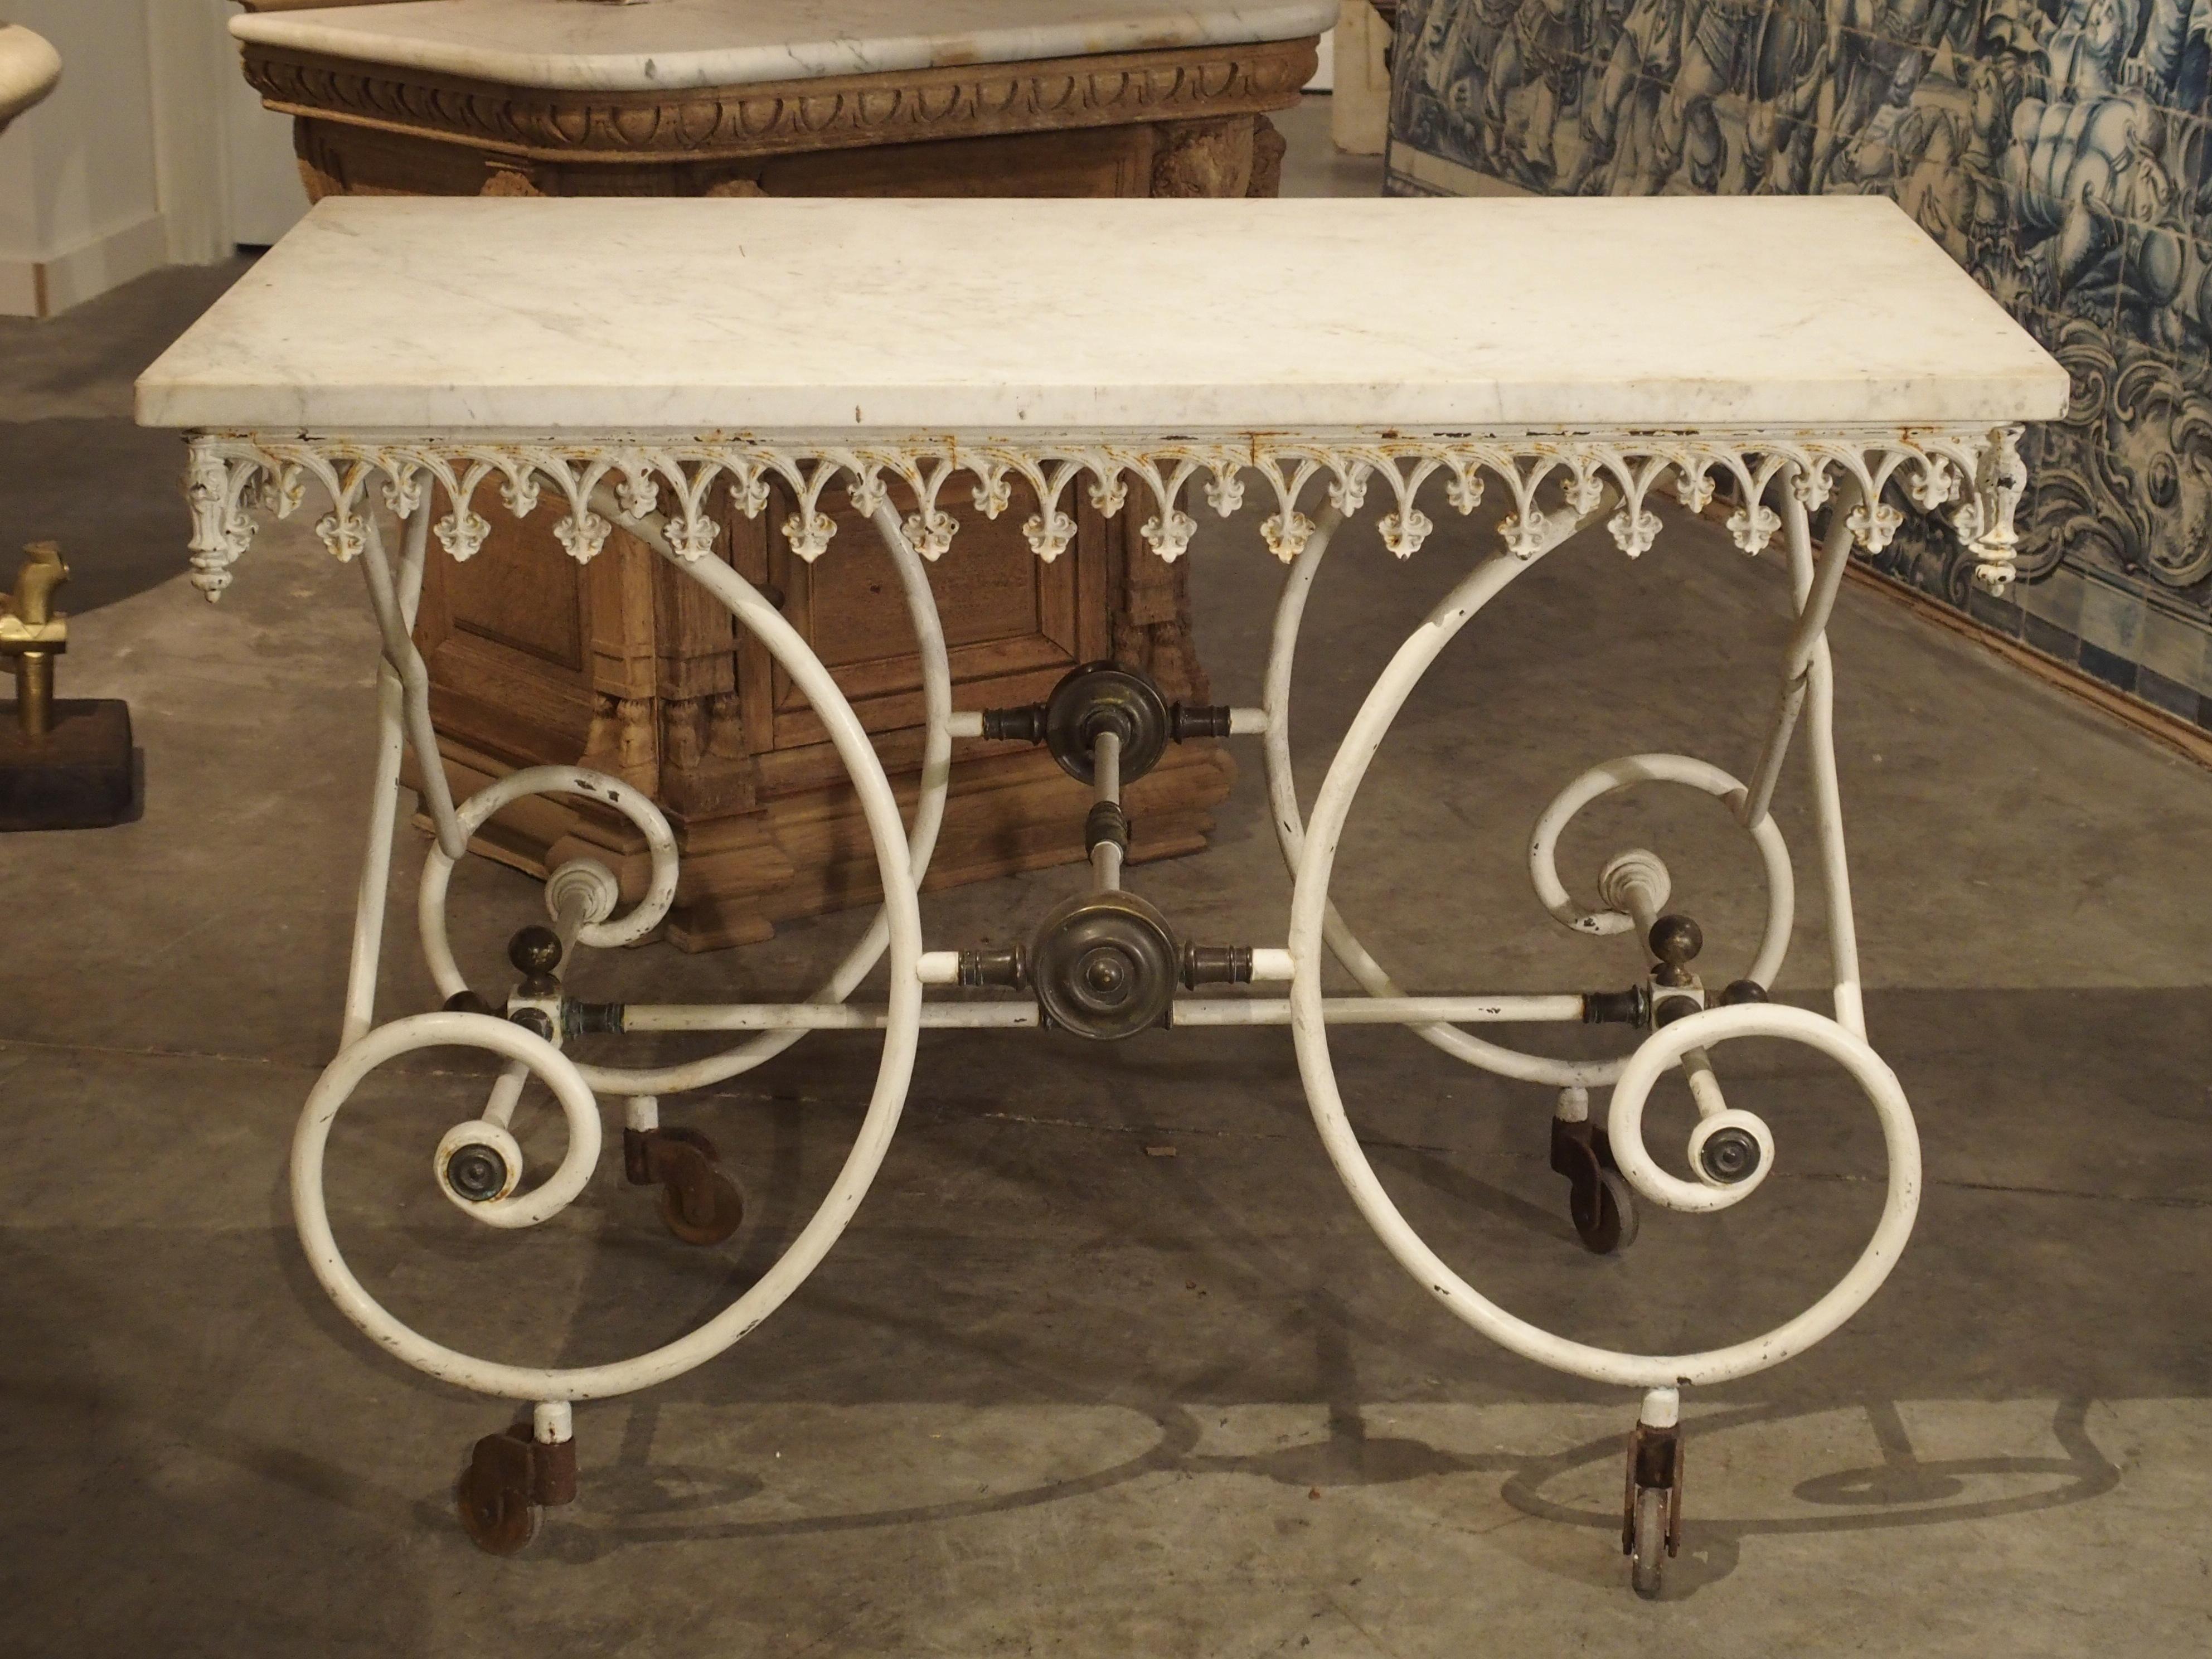 Hand-Painted 19th Century, French Pastry or Butchers Display Table with Carrara Marble Top